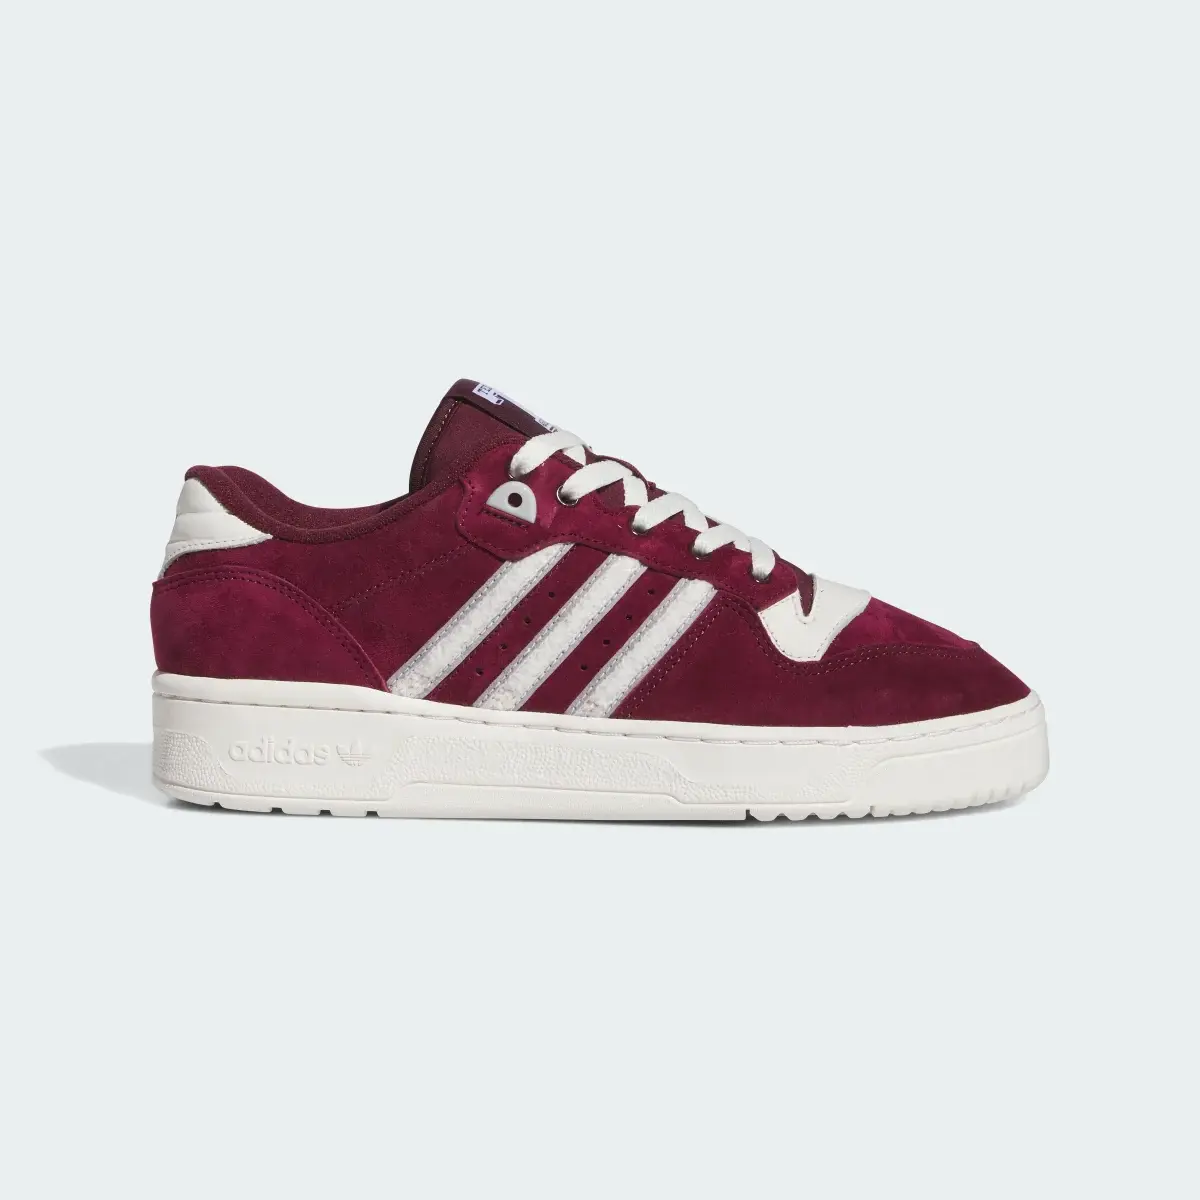 Adidas Texas A&M Rivalry Low Shoes. 2